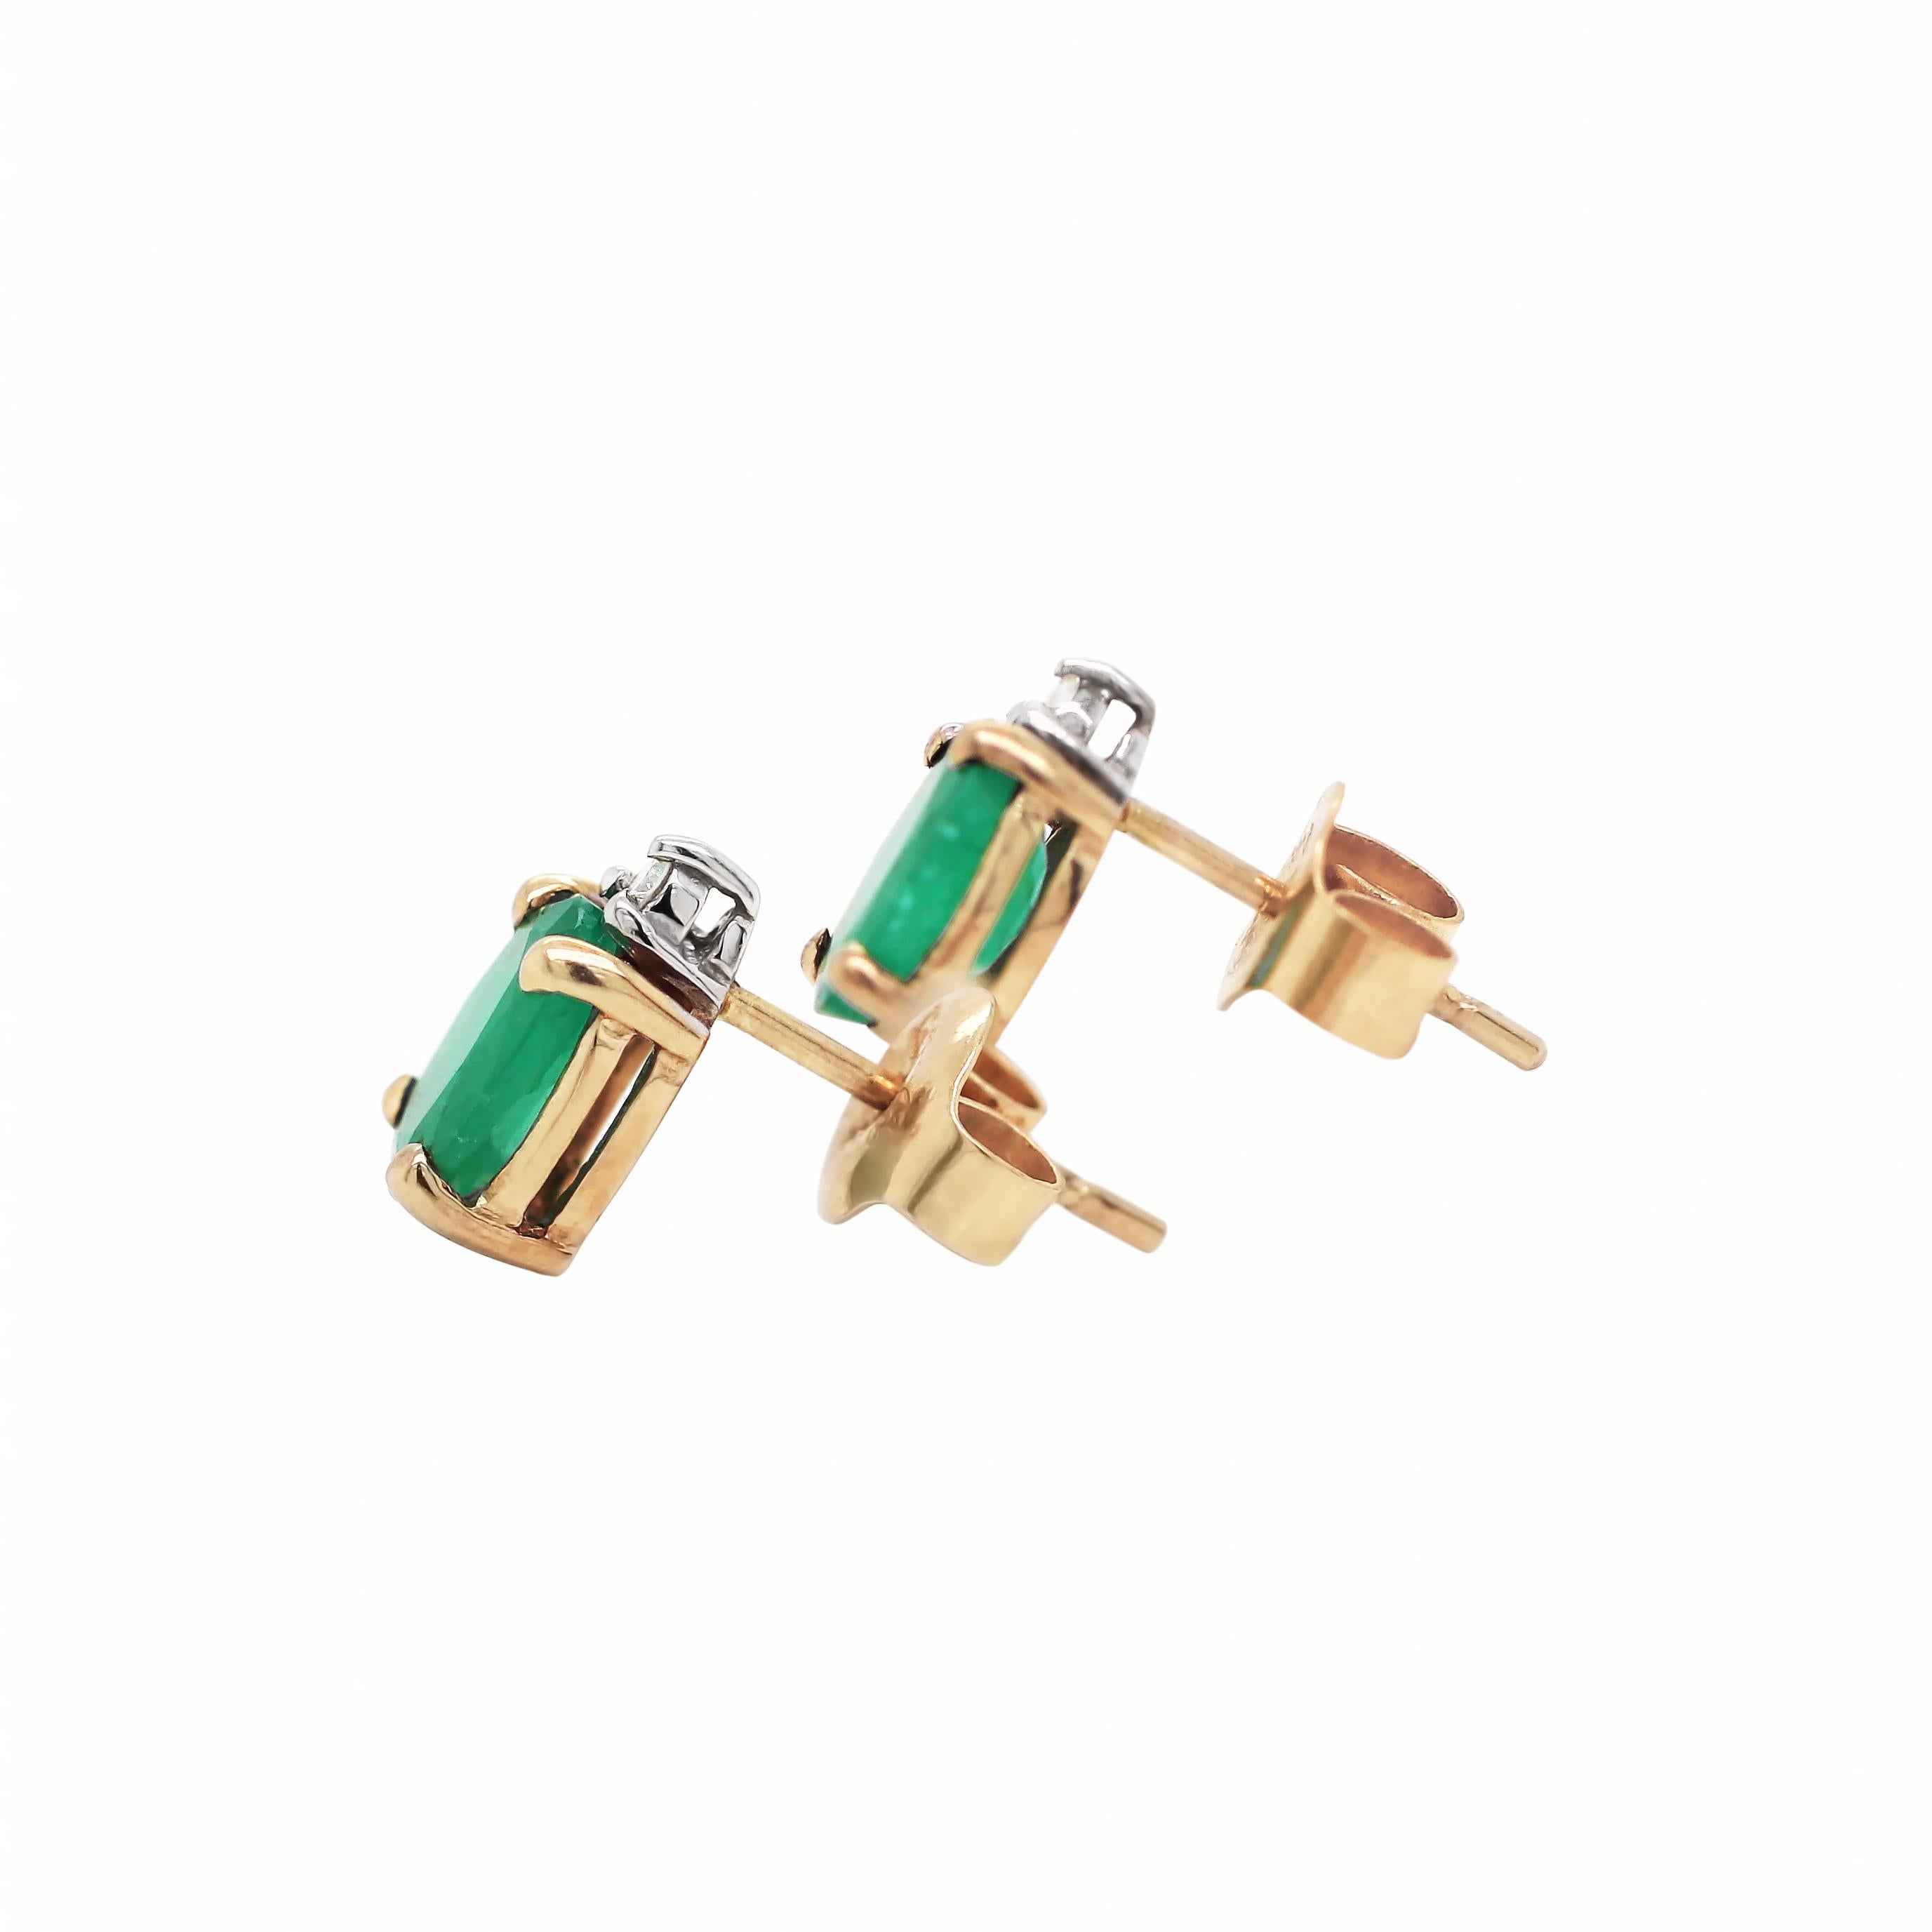 These stud earrings feature an oval cut emerald weighing approximately 0.60ct in each, mounted in an 18 carat yellow gold four claw, open back setting. The emerald is beautifully accompanied by a round brilliant cut diamond above, weighing